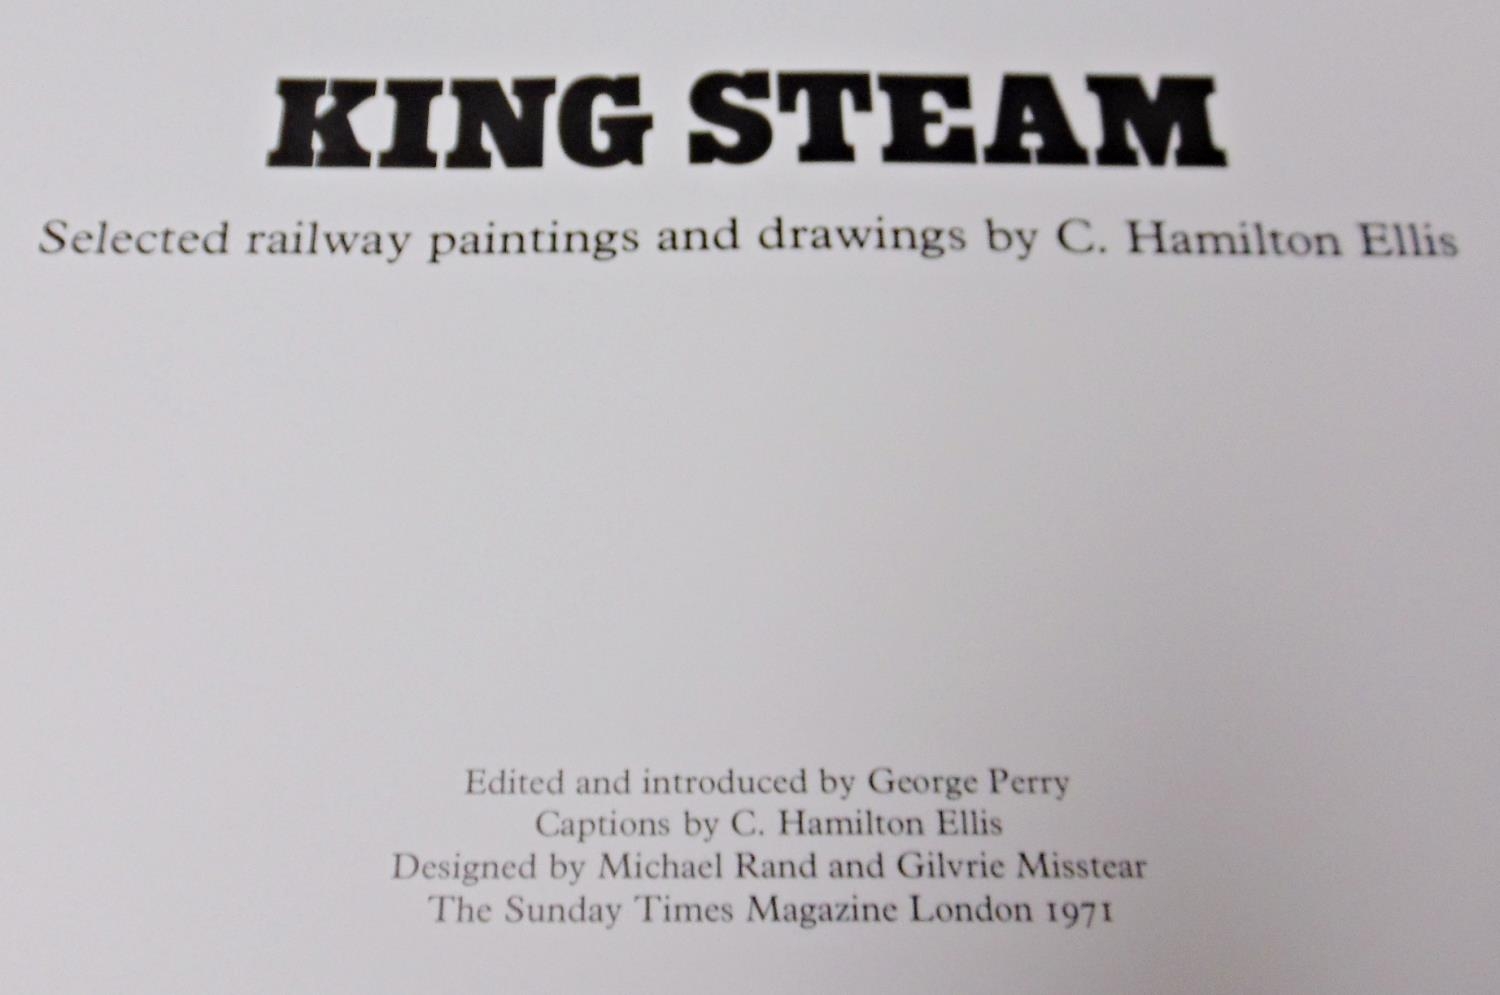 Hamilton Ellis, C - King Stein - Selected Railway Paintings and Drawings, 9/3000 limited edition, - Image 3 of 6